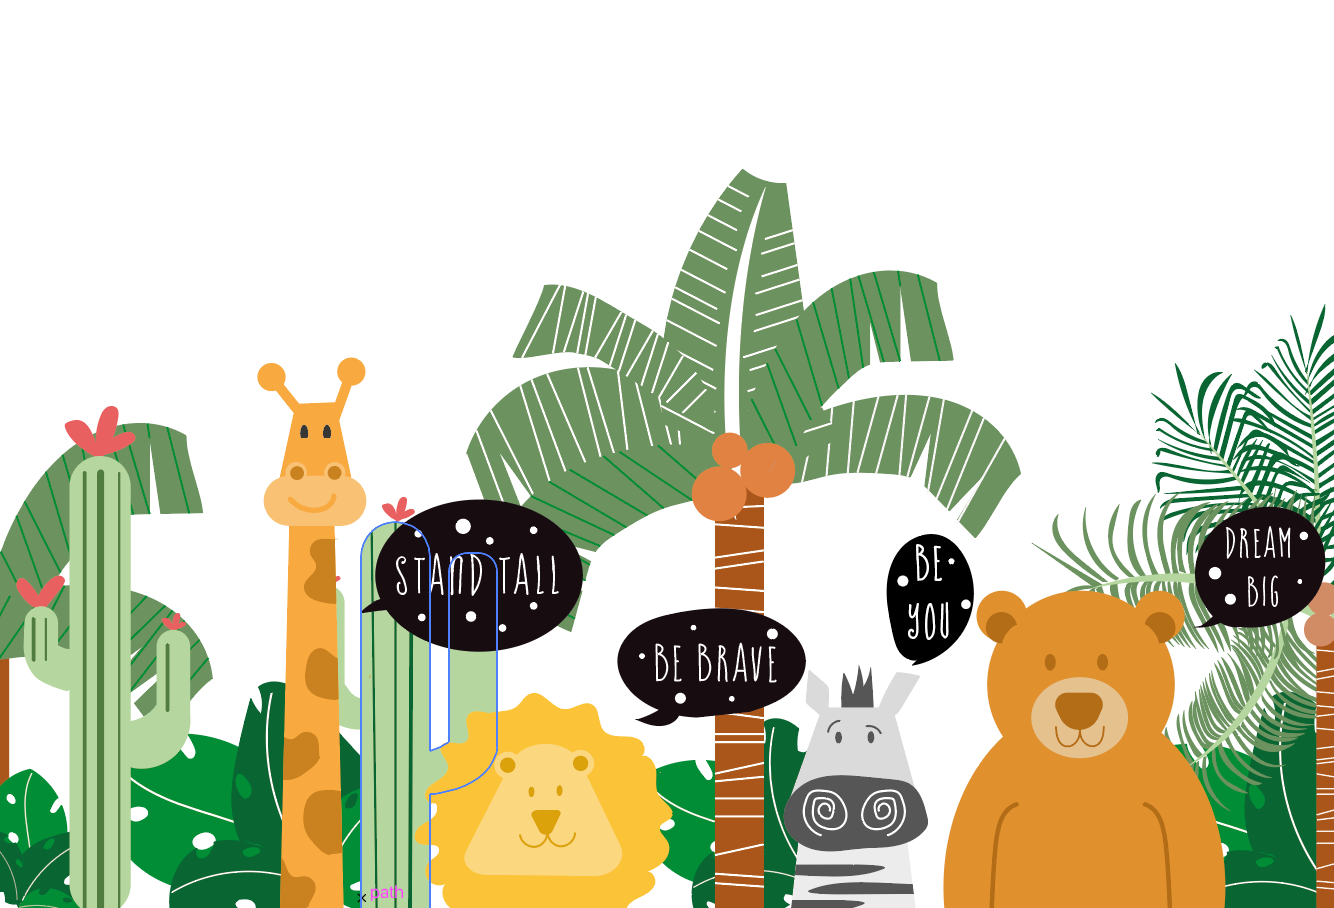 Kid's wallpaper with animals saying positive things